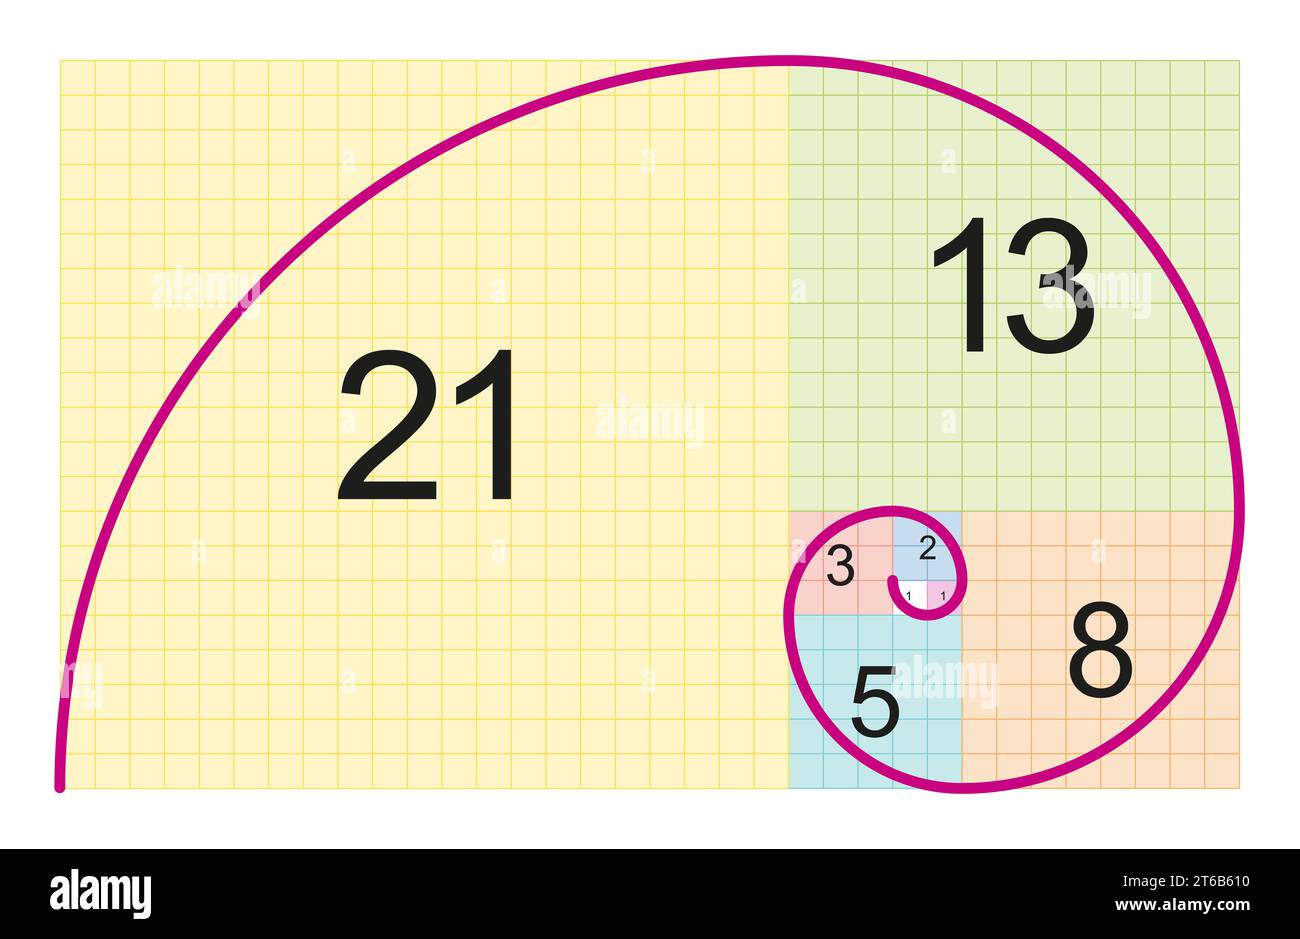 Fibonacci spiral and approximation of the golden spiral. Circular arcs connecting opposite corners of squares in the Fibonacci tiling with squares. Stock Photo